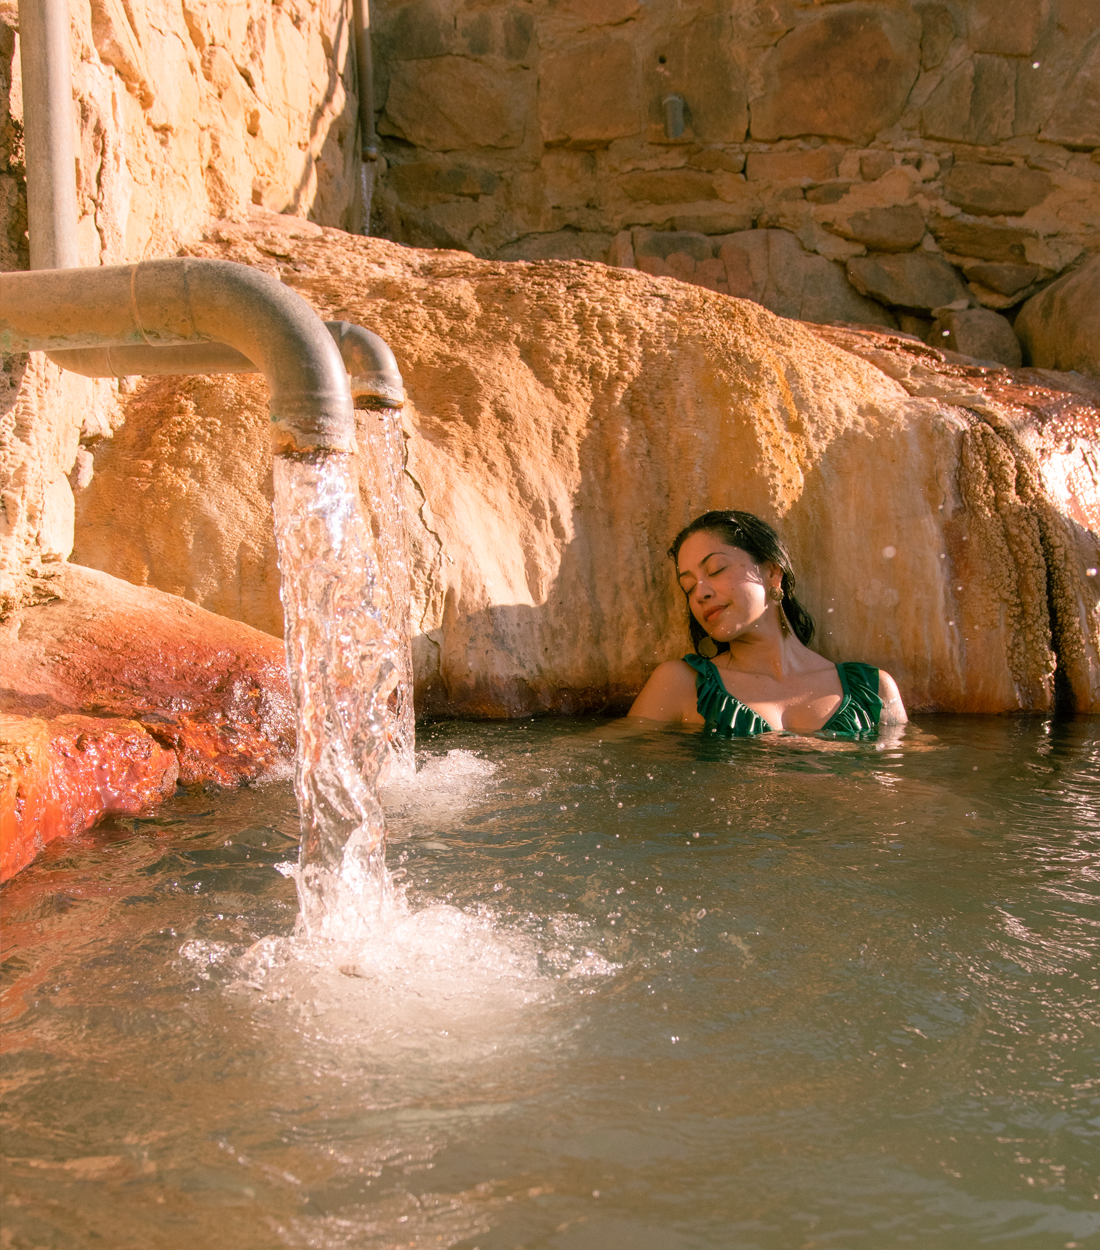 Hot Springs pools with water coming from large pottery and woman floating on her back in the center